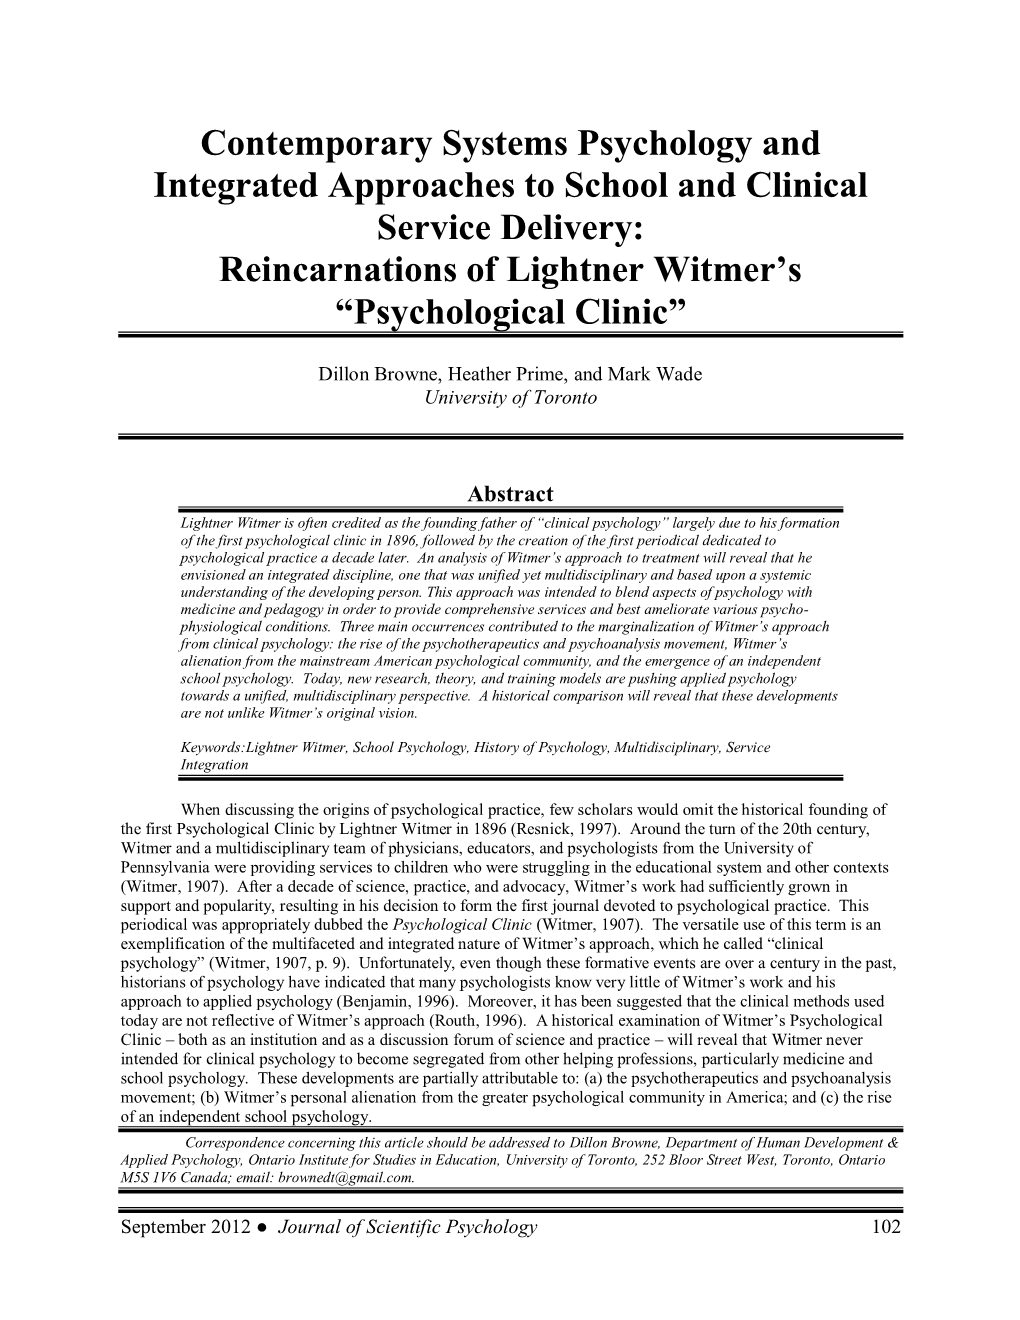 Contemporary Systems Psychology and Integrated Approaches to School and Clinical Service Delivery: Reincarnations of Lightner Witmer’S “Psychological Clinic”